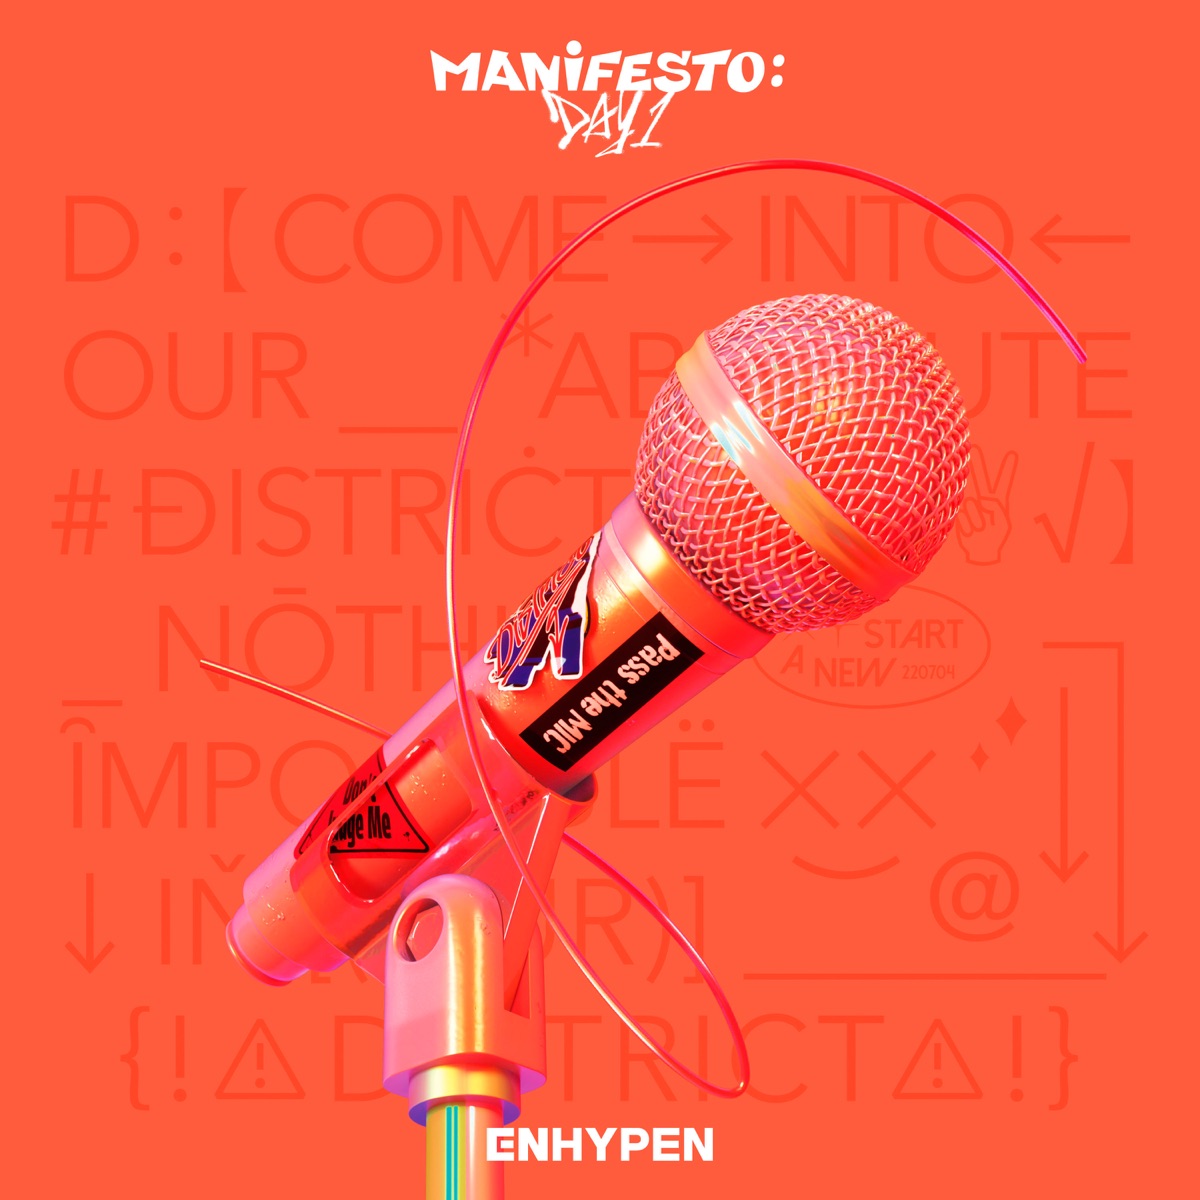 Cover art for『ENHYPEN - ParadoXXX Invasion』from the release『MANIFESTO : DAY 1